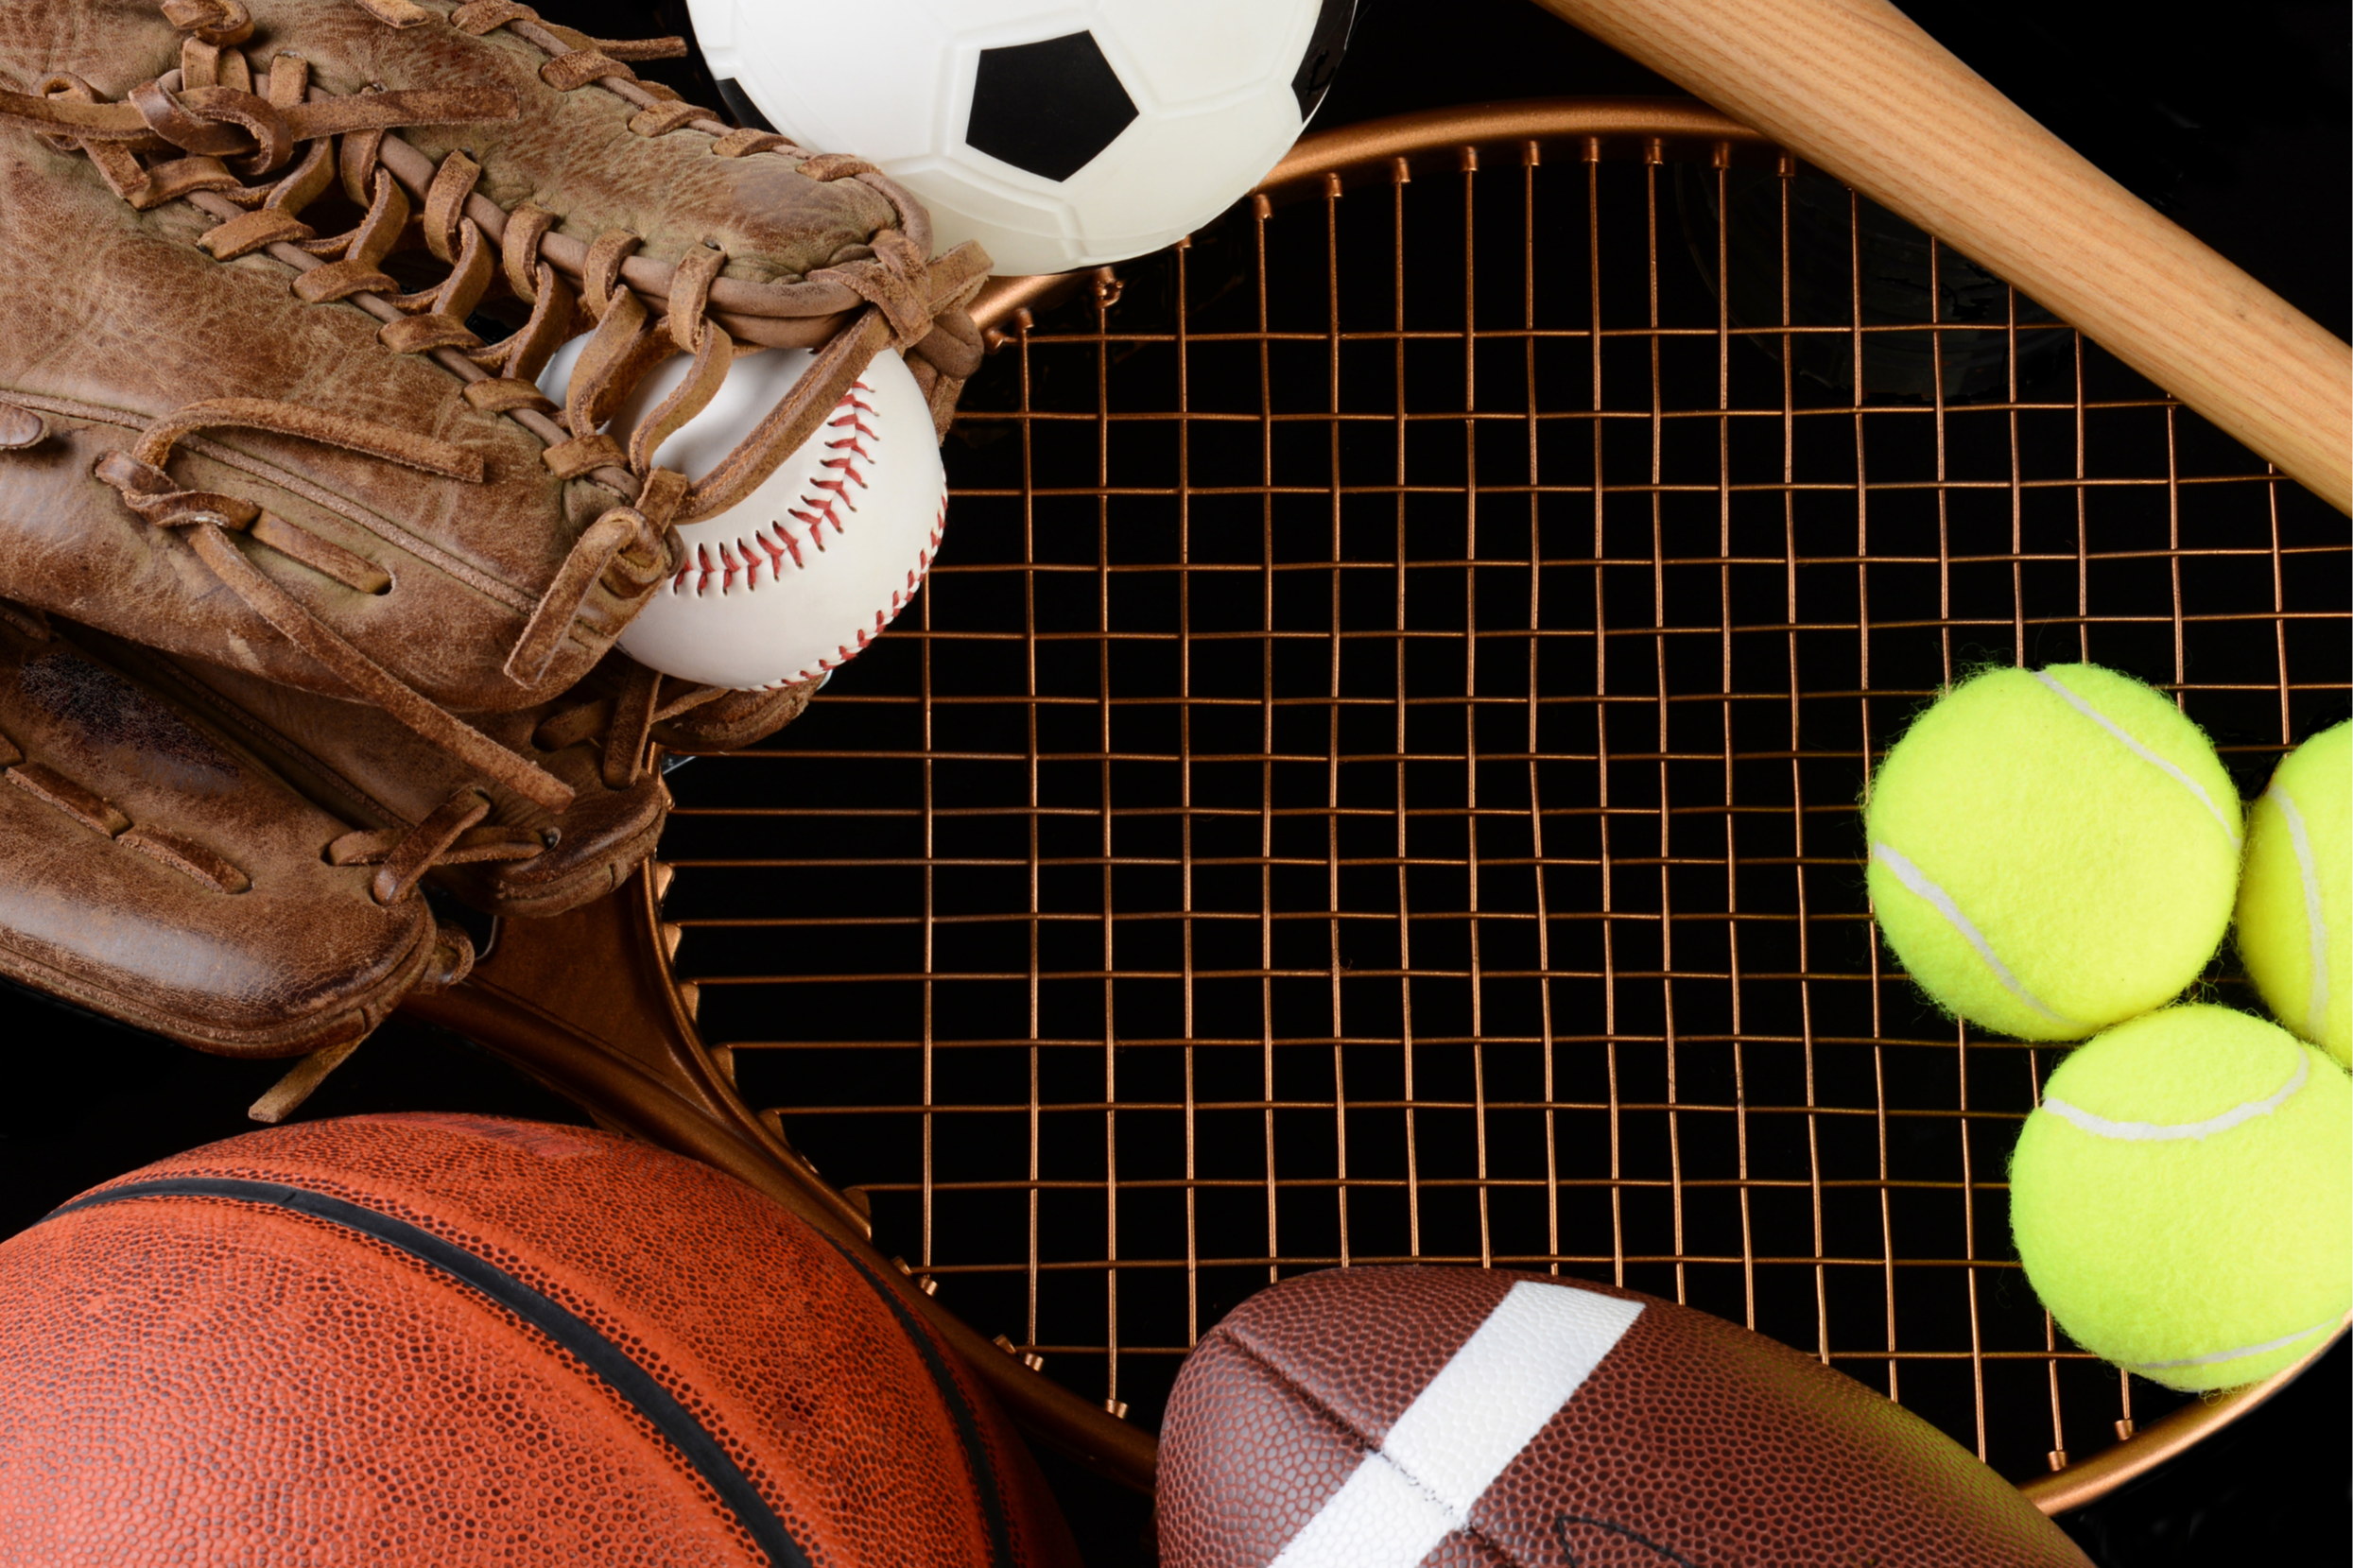 PICTURE OF ASSORTED SPORTS EQUIPMENT